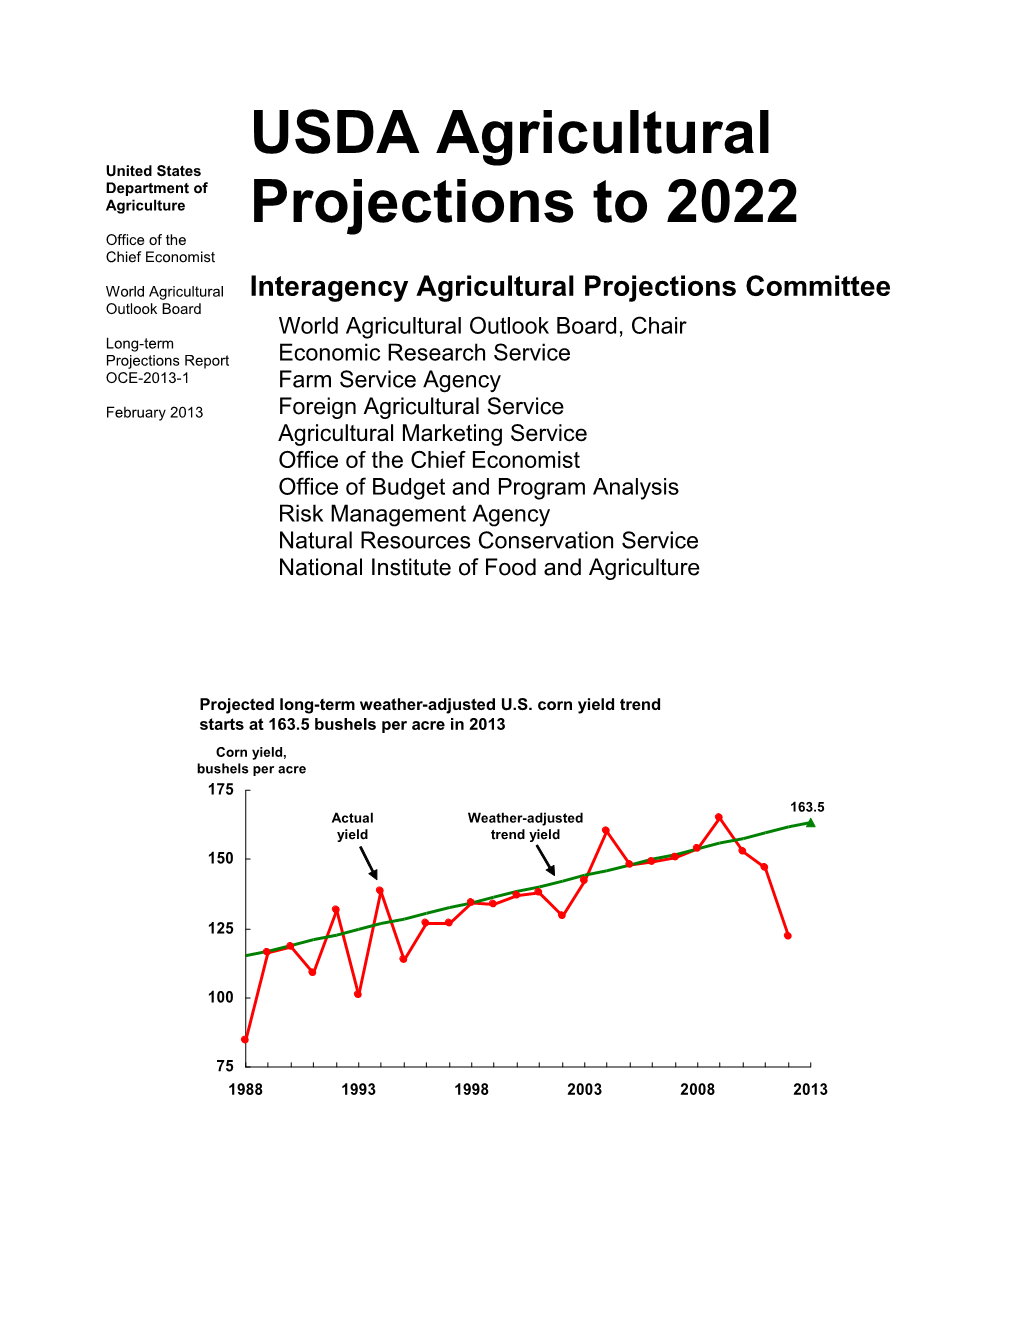 Long-Term Projections on the Internet